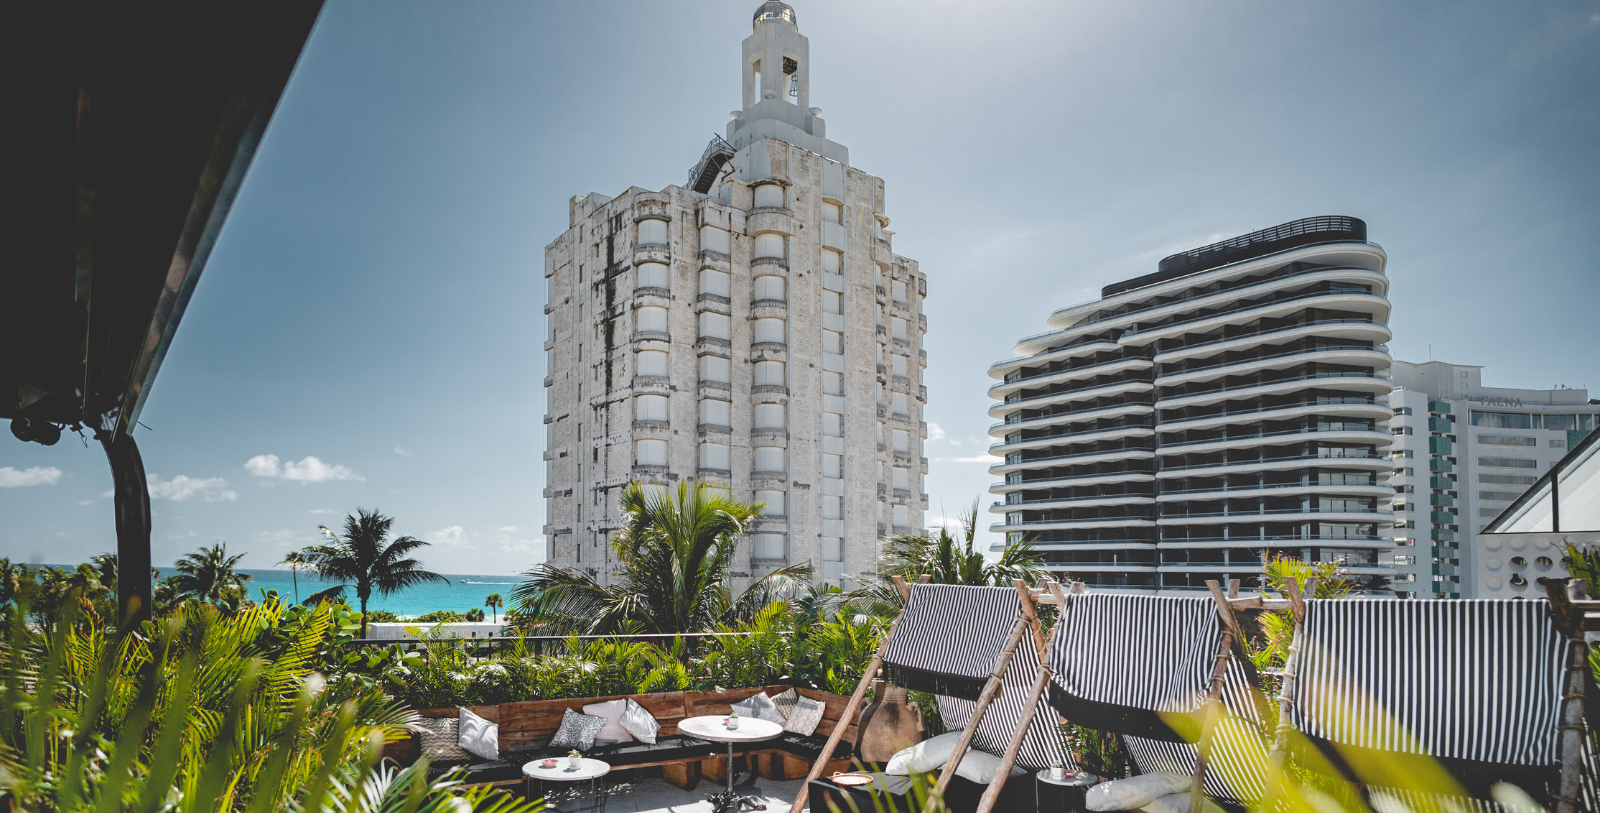 Spend the day relaxing at the beach, just steps away from Casa Faena.